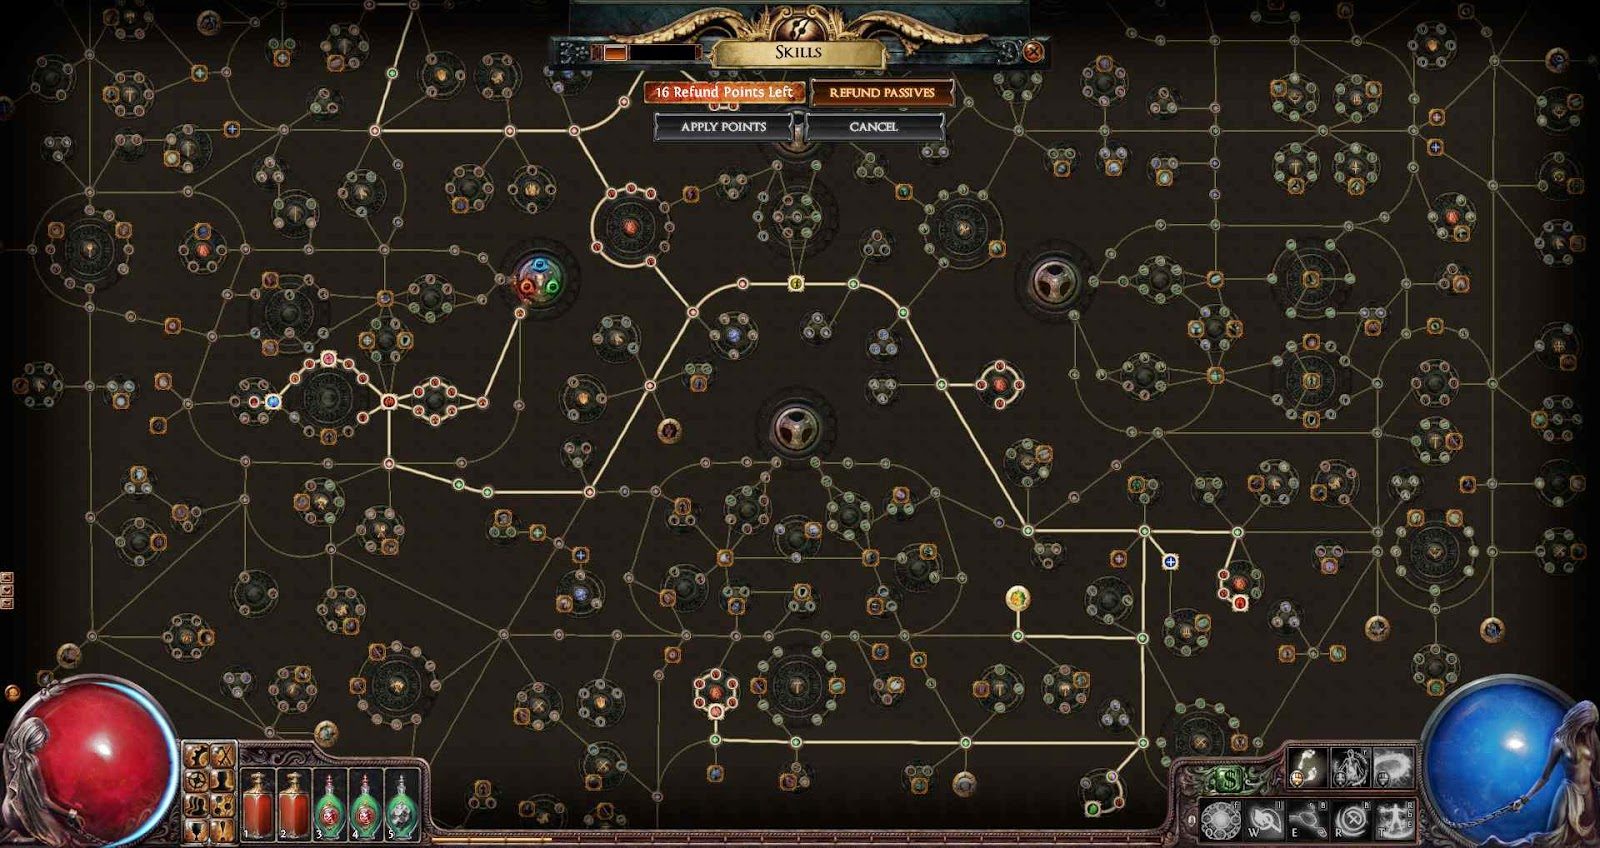 Path of Exile's Skill Web, though often daunting to outsiders, aims to provide players with as many avenues for creative play as possible.